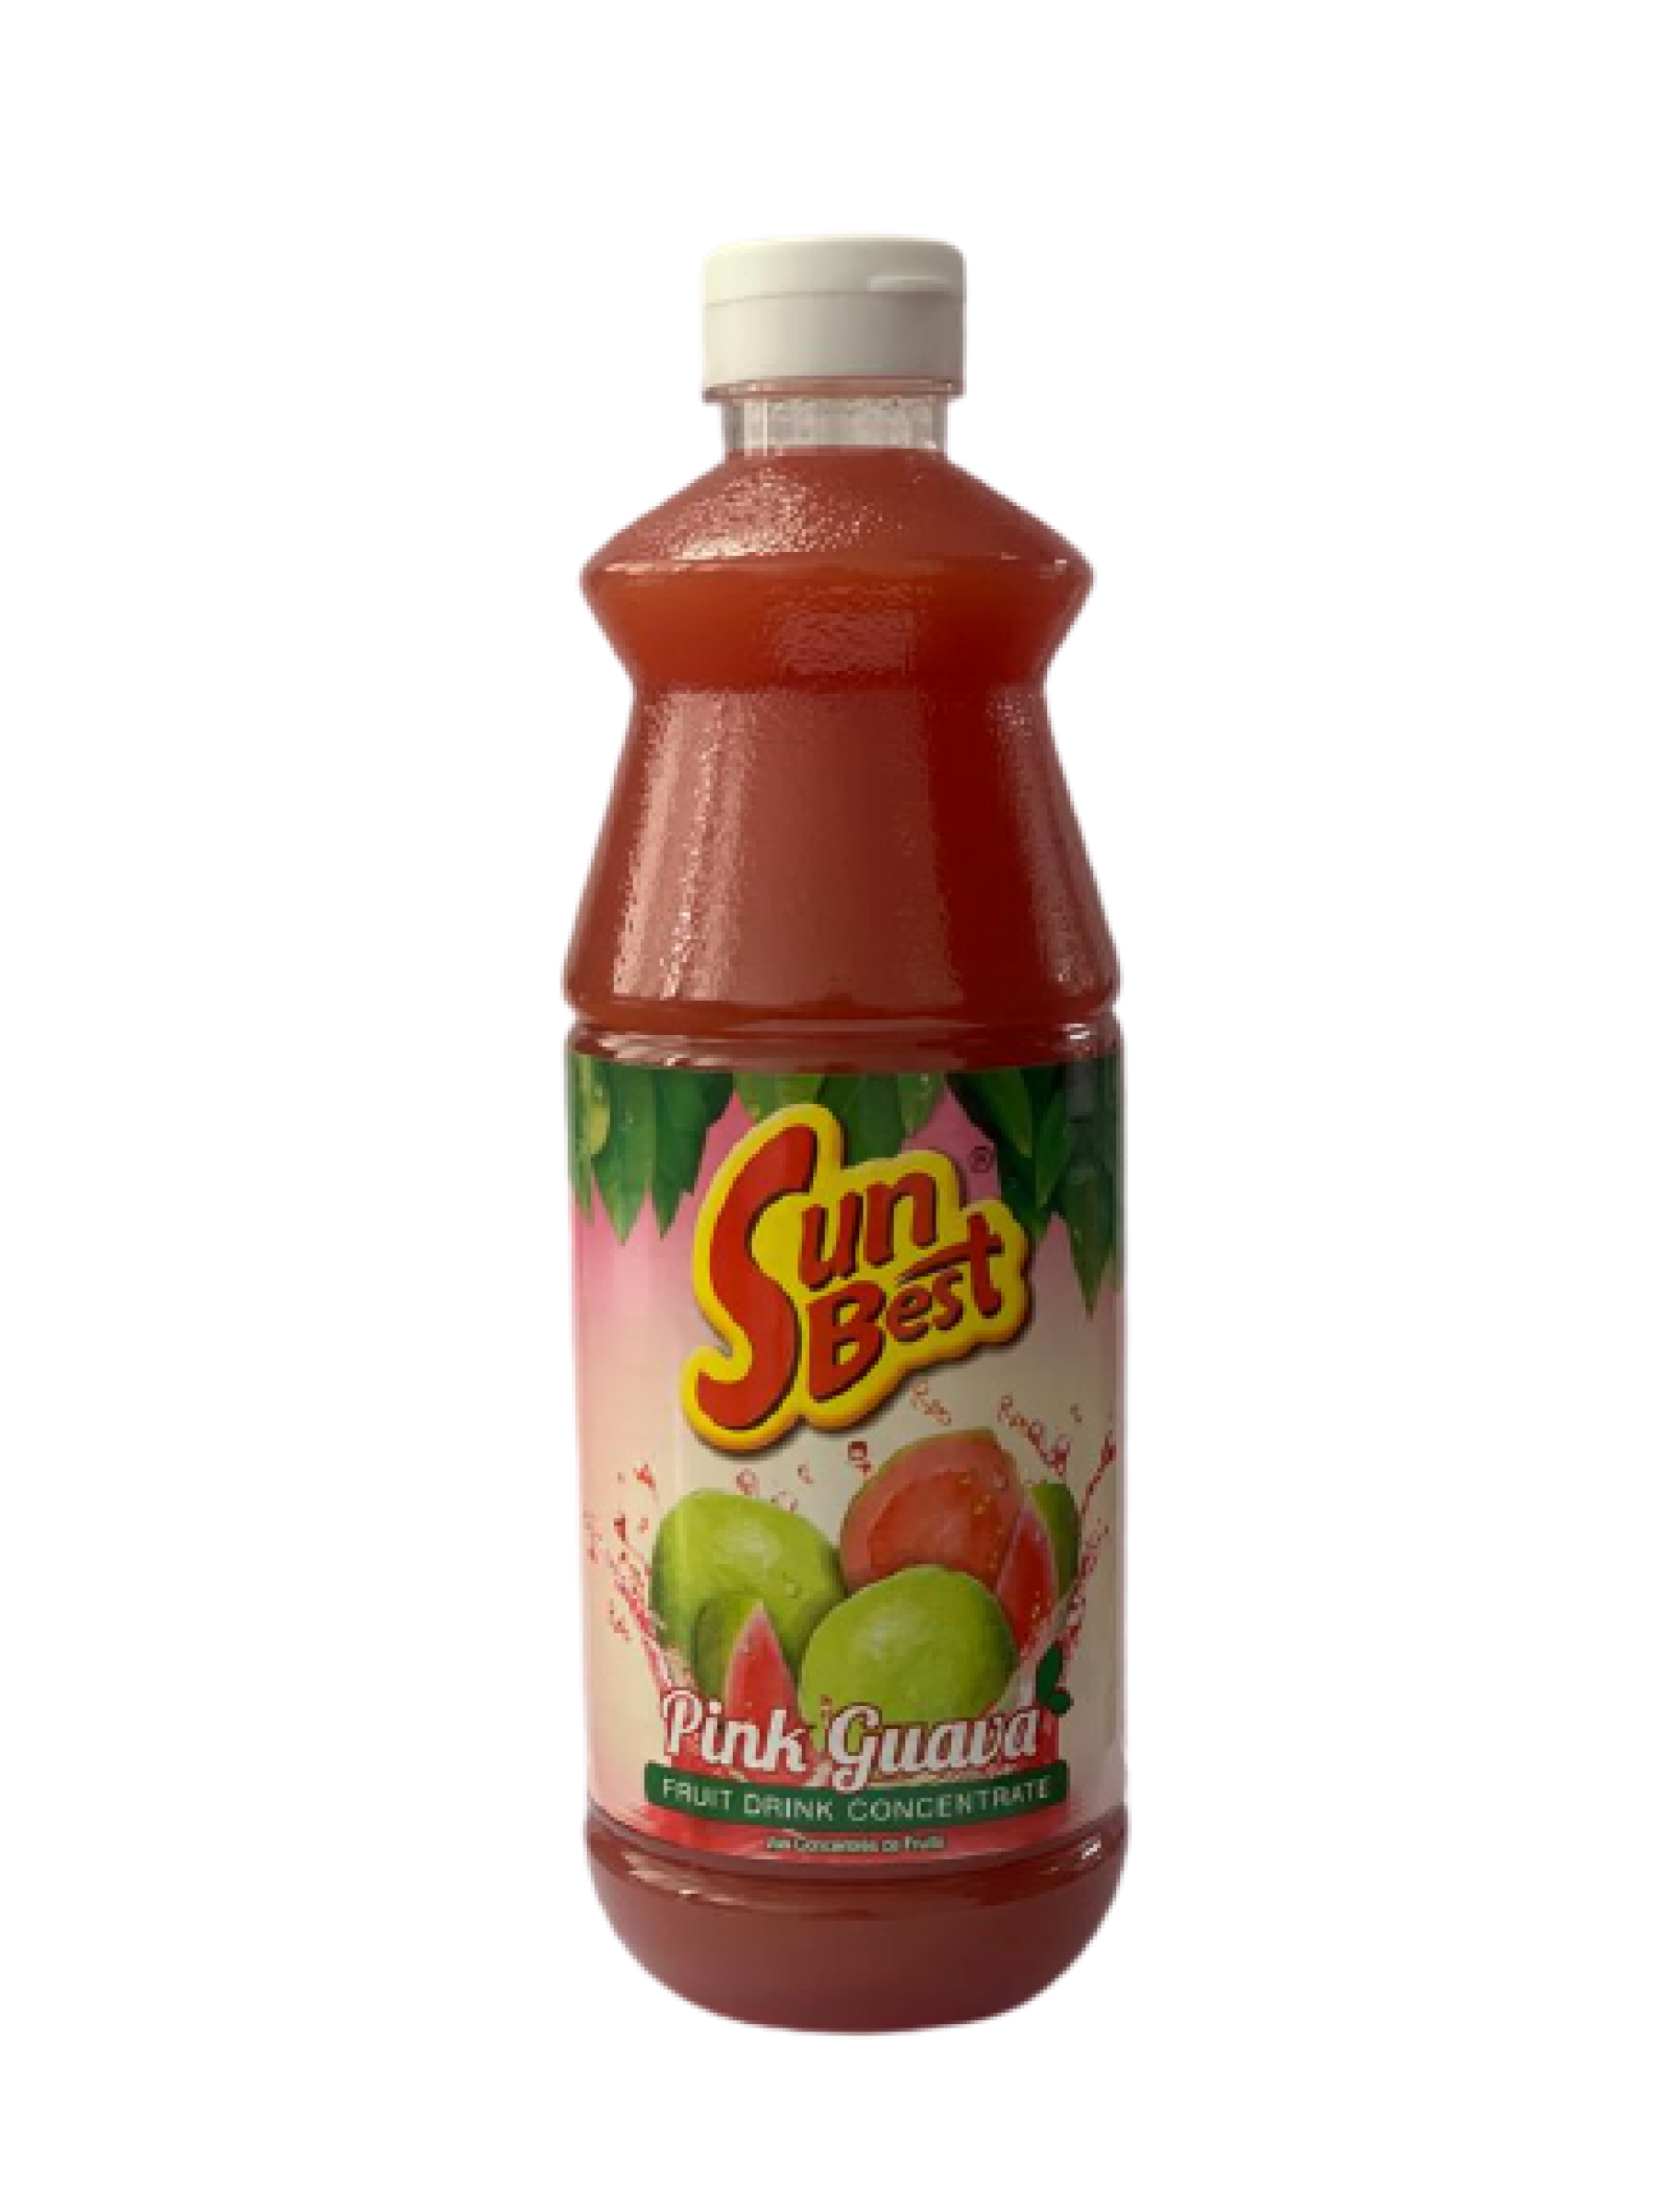 SunBest 850ml Pink Guava Fruit Drink Concentrate